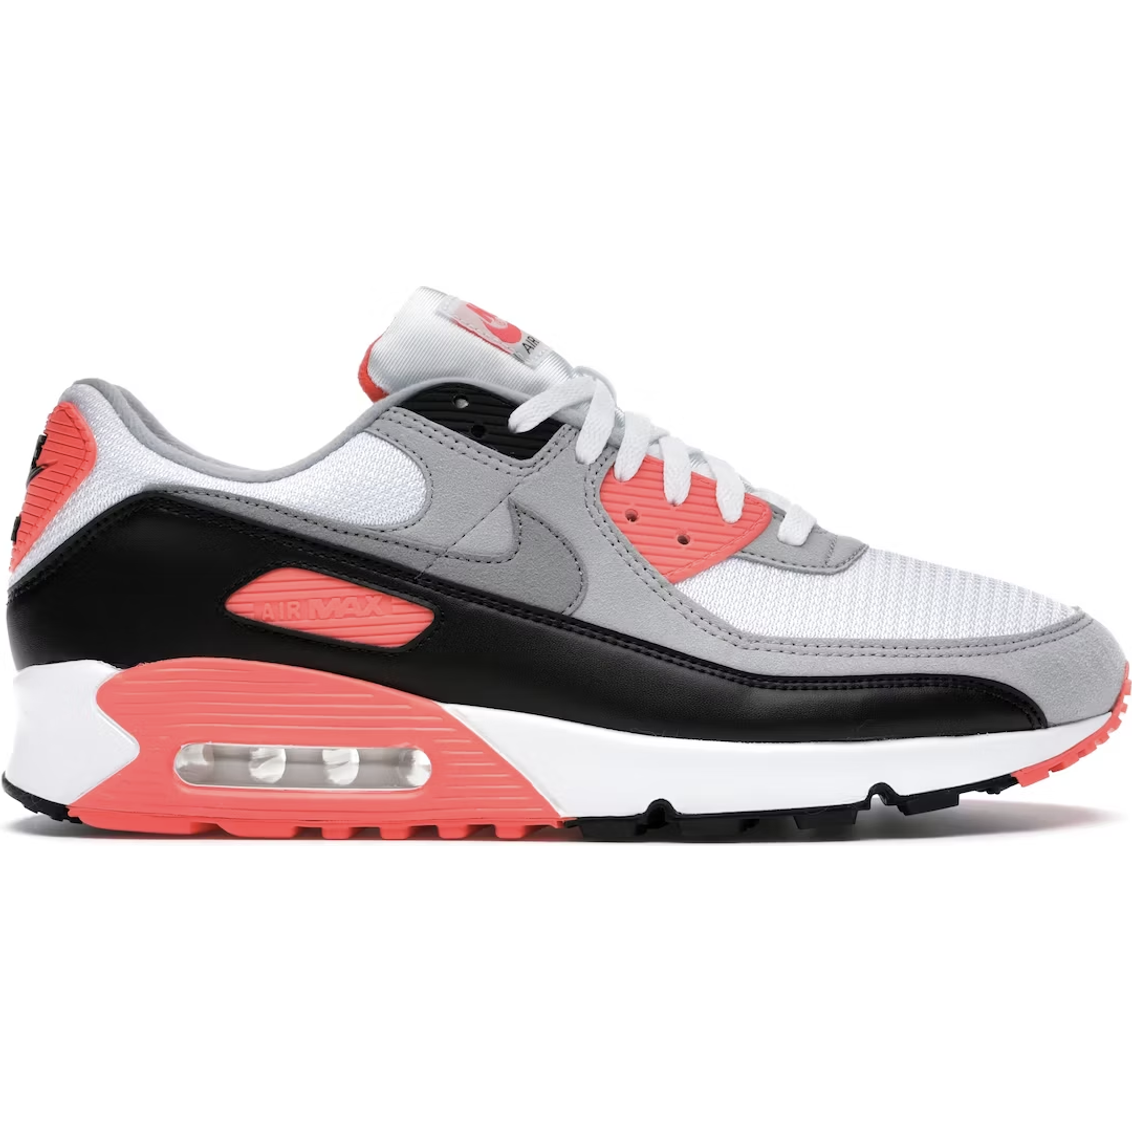 Nike Air Max 90 Infrared (2020) from Nike